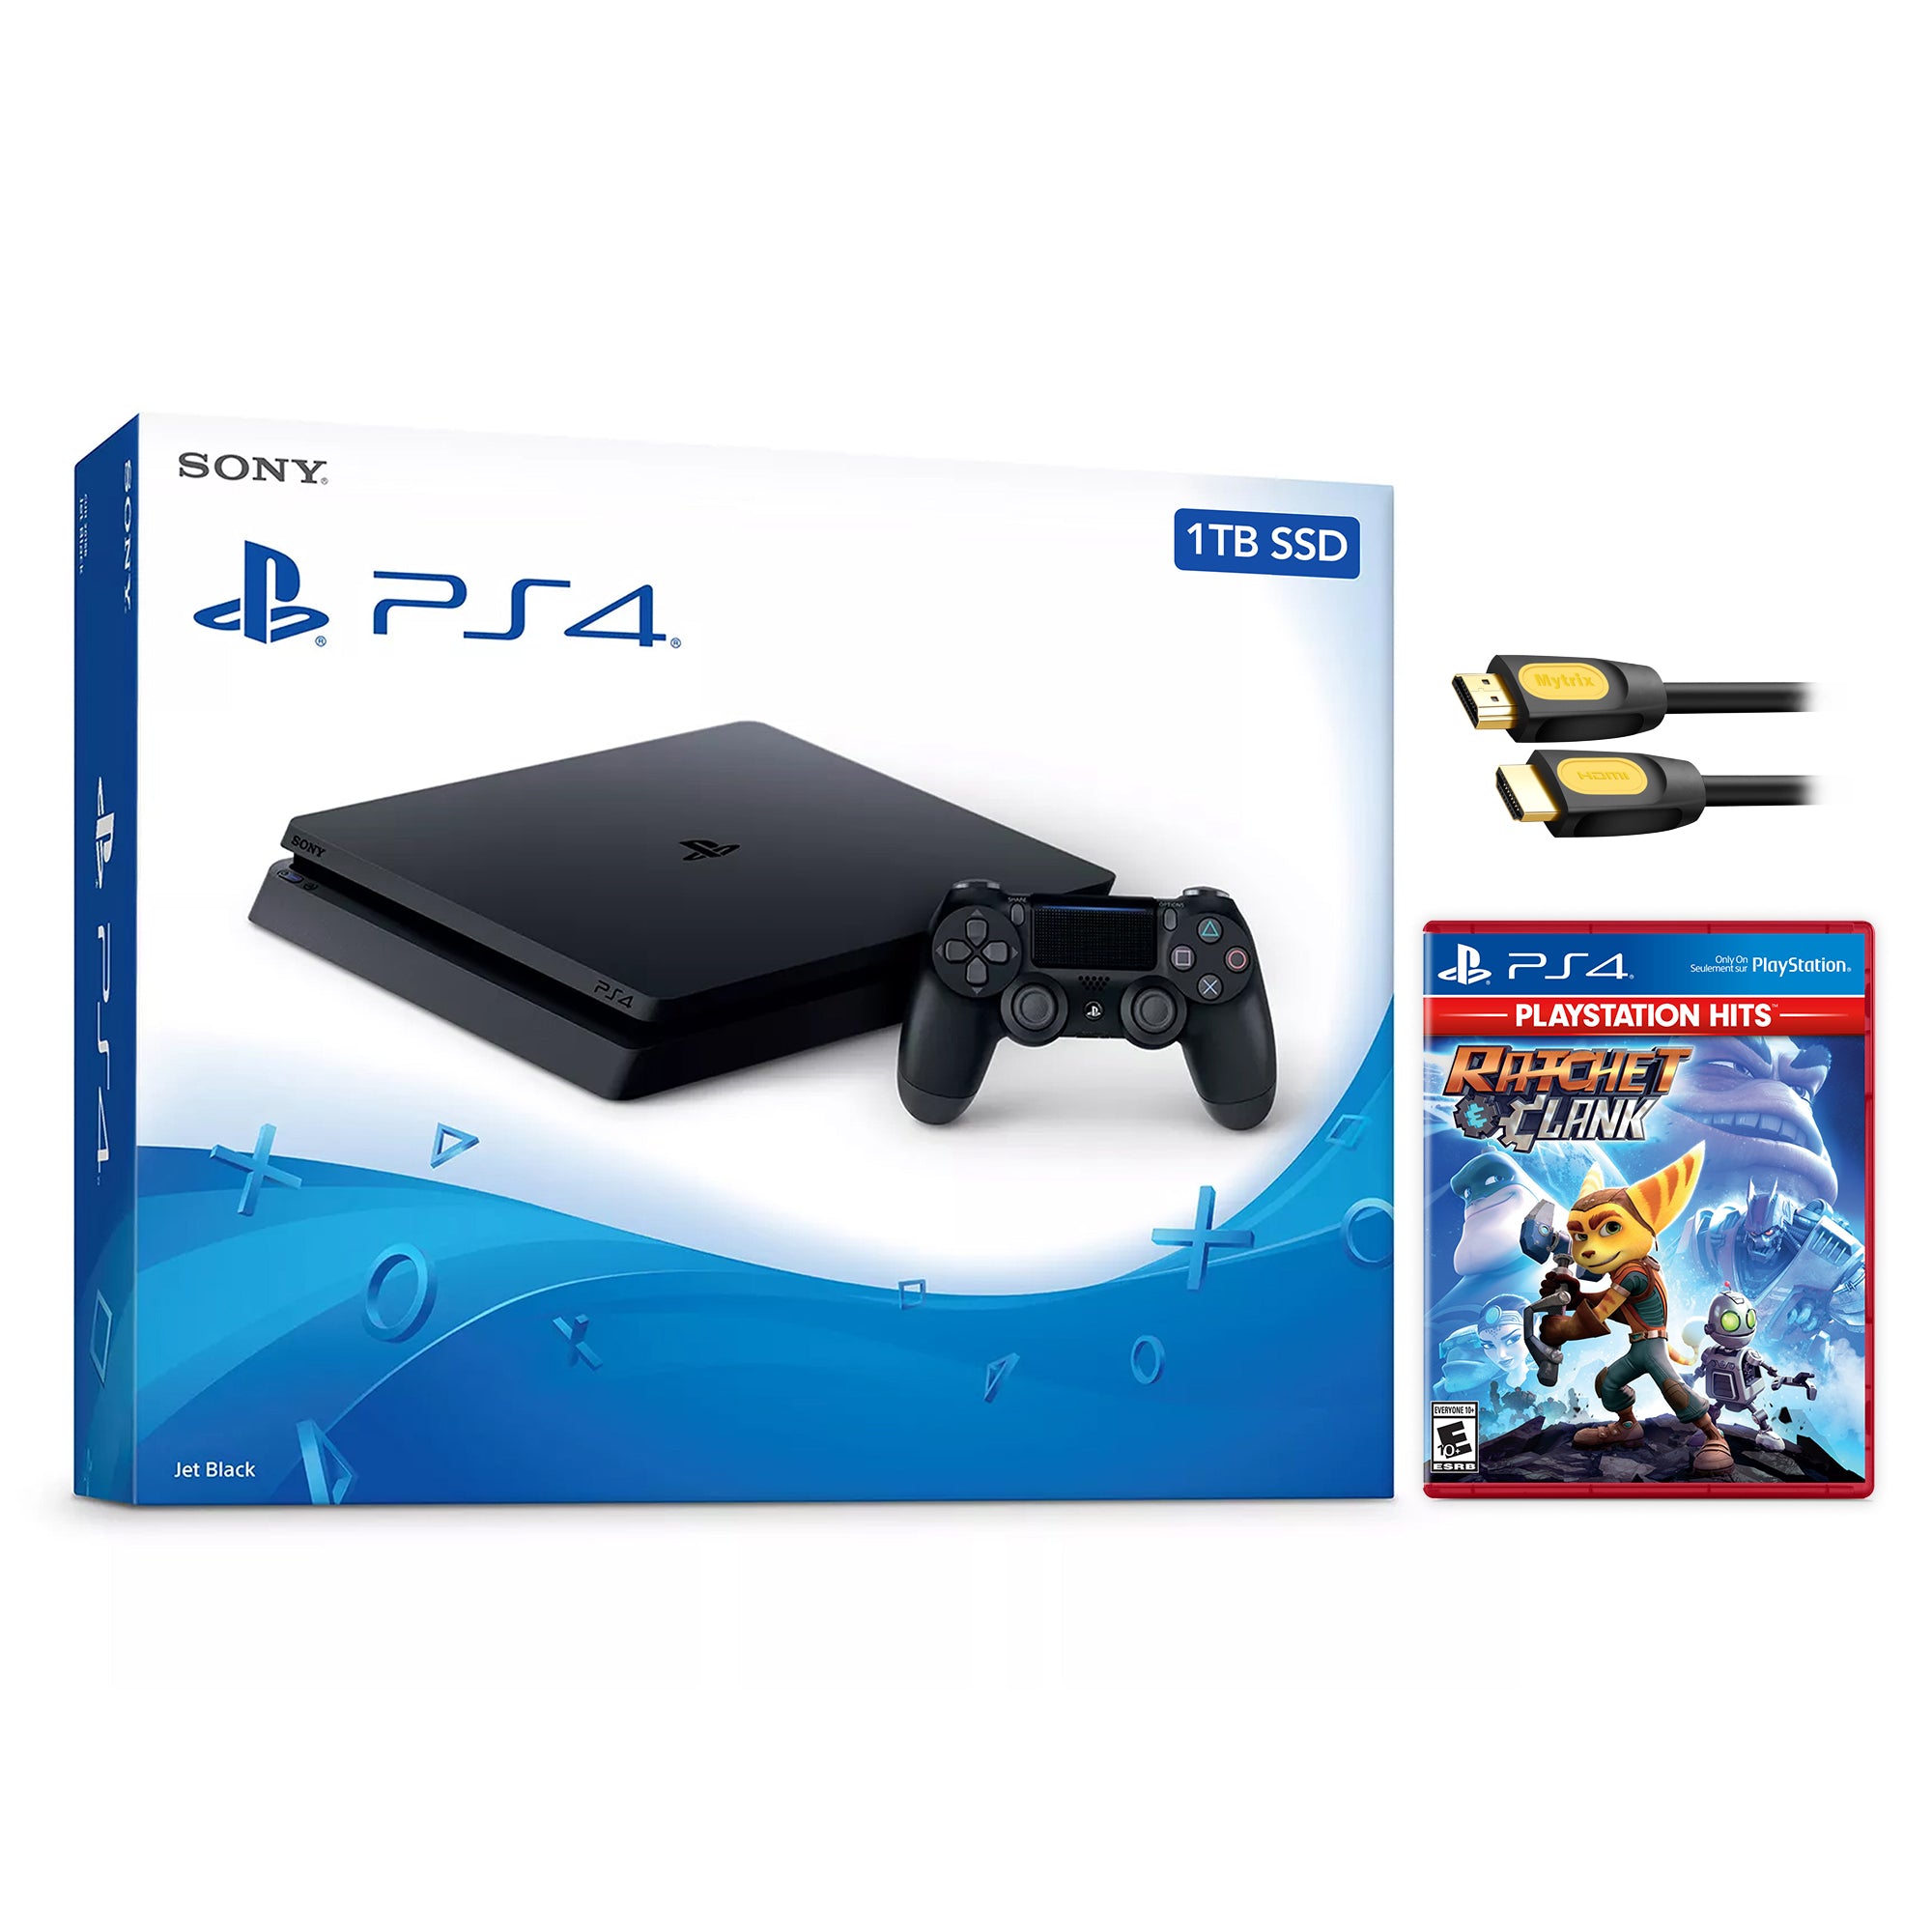 Sony PlayStation 4 Slim Storage Upgrade 1TB SSD PS4 Gaming Console, Jet Black, with Mytrix High Speed HDMI - Enhanced PS4 Internal Fast Solid State Drive